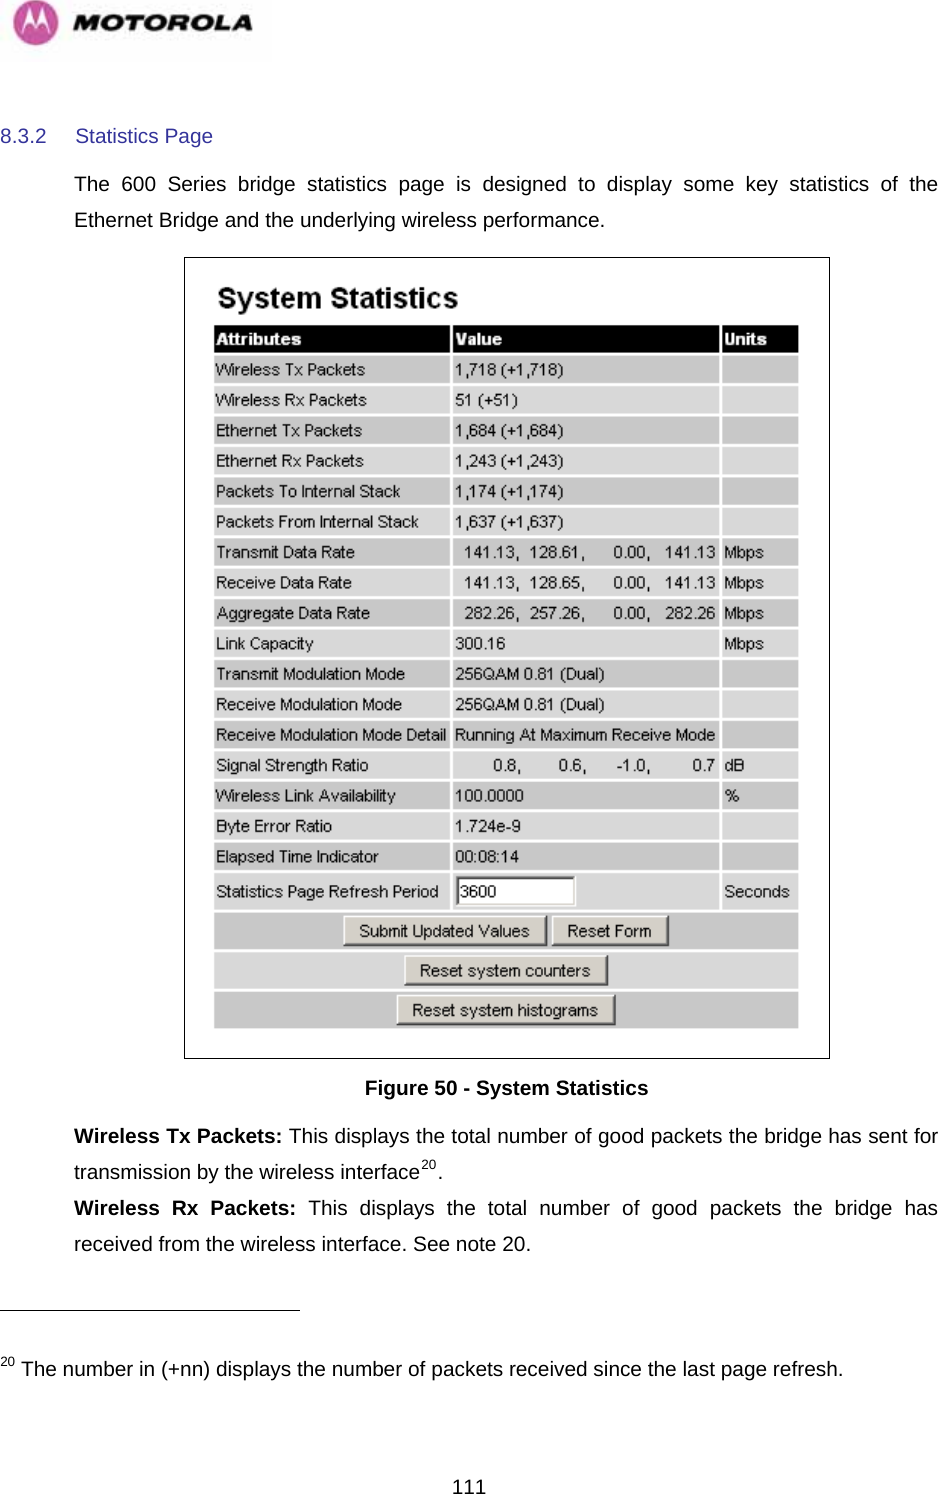   1118.3.2  Statistics Page  The 600 Series bridge statistics page is designed to display some key statistics of the Ethernet Bridge and the underlying wireless performance.   Figure 50 - System Statistics Wireless Tx Packets: This displays the total number of good packets the bridge has sent for transmission by the wireless interface20. Wireless Rx Packets: This displays the total number of good packets the bridge has received from the wireless interface. See note 20.                                                       20 The number in (+nn) displays the number of packets received since the last page refresh. 